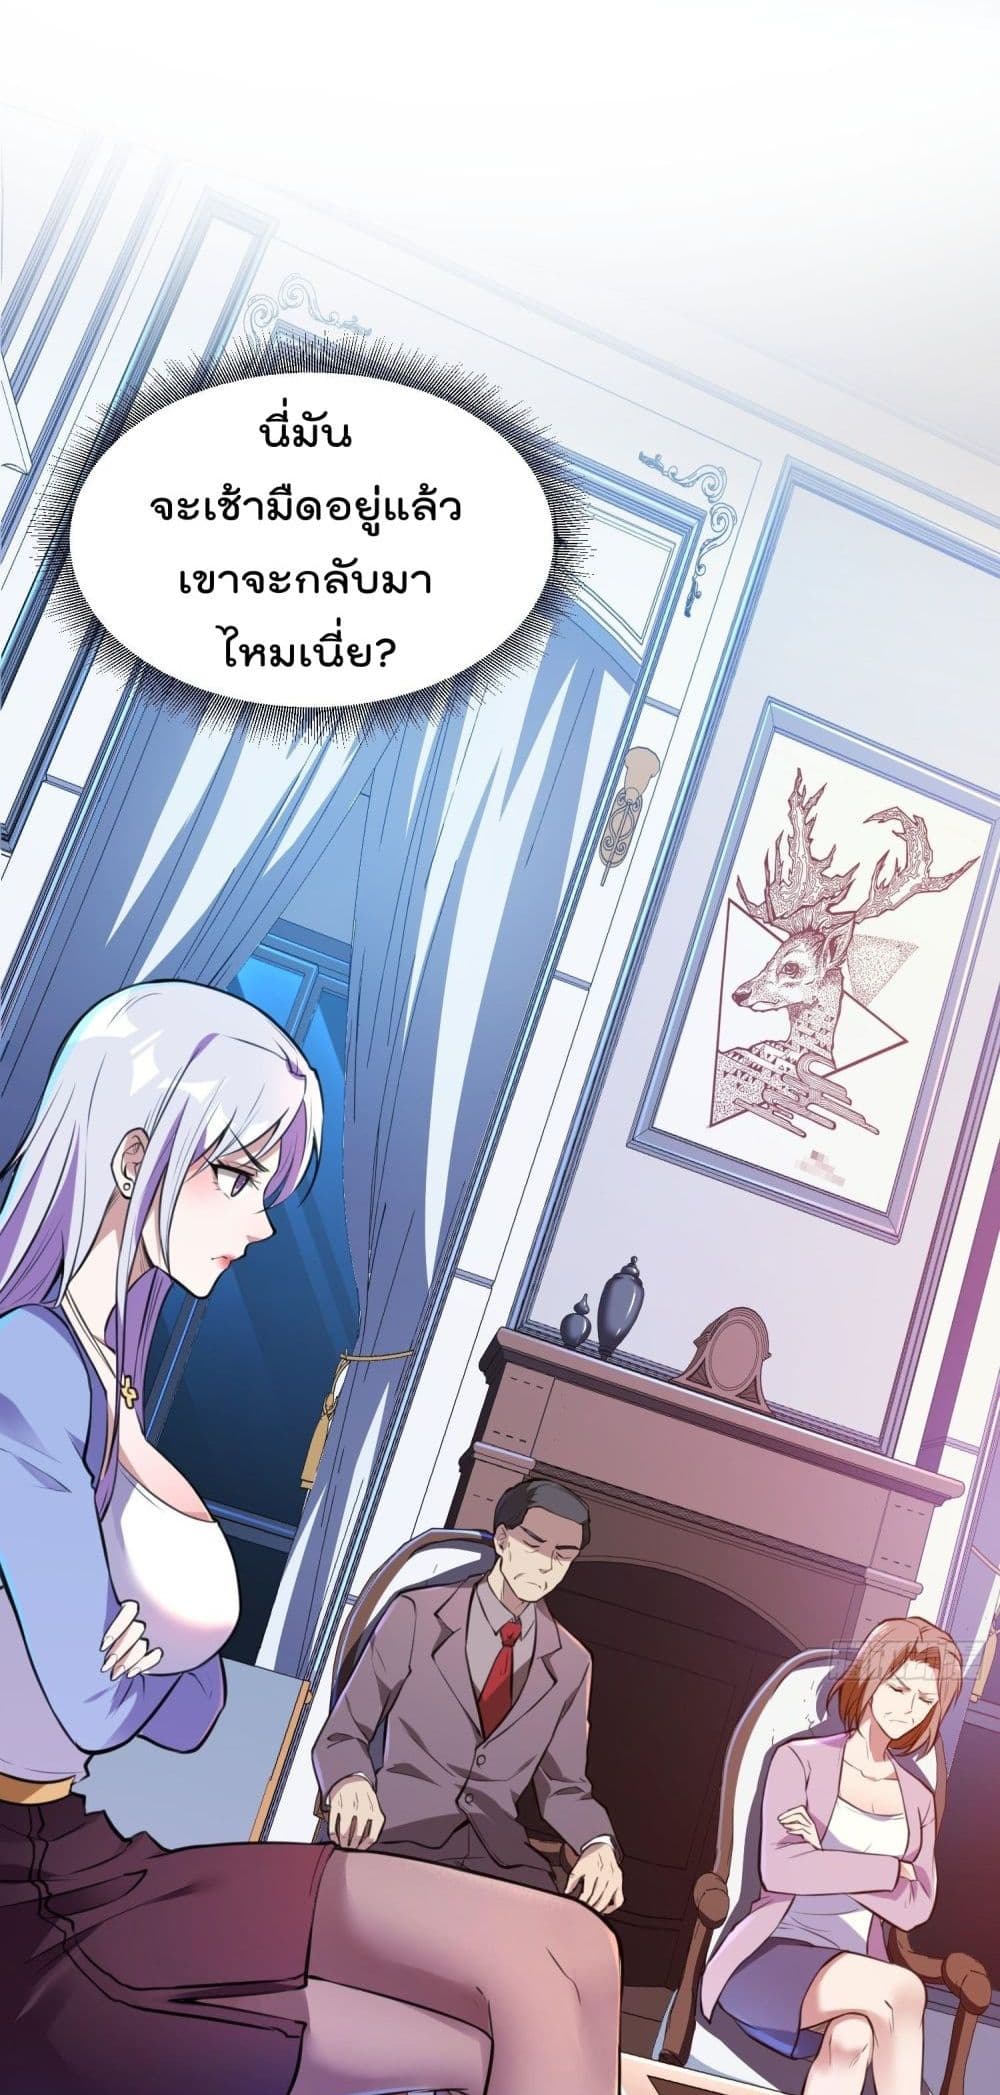 Immortal Husband in The City 18 (43)